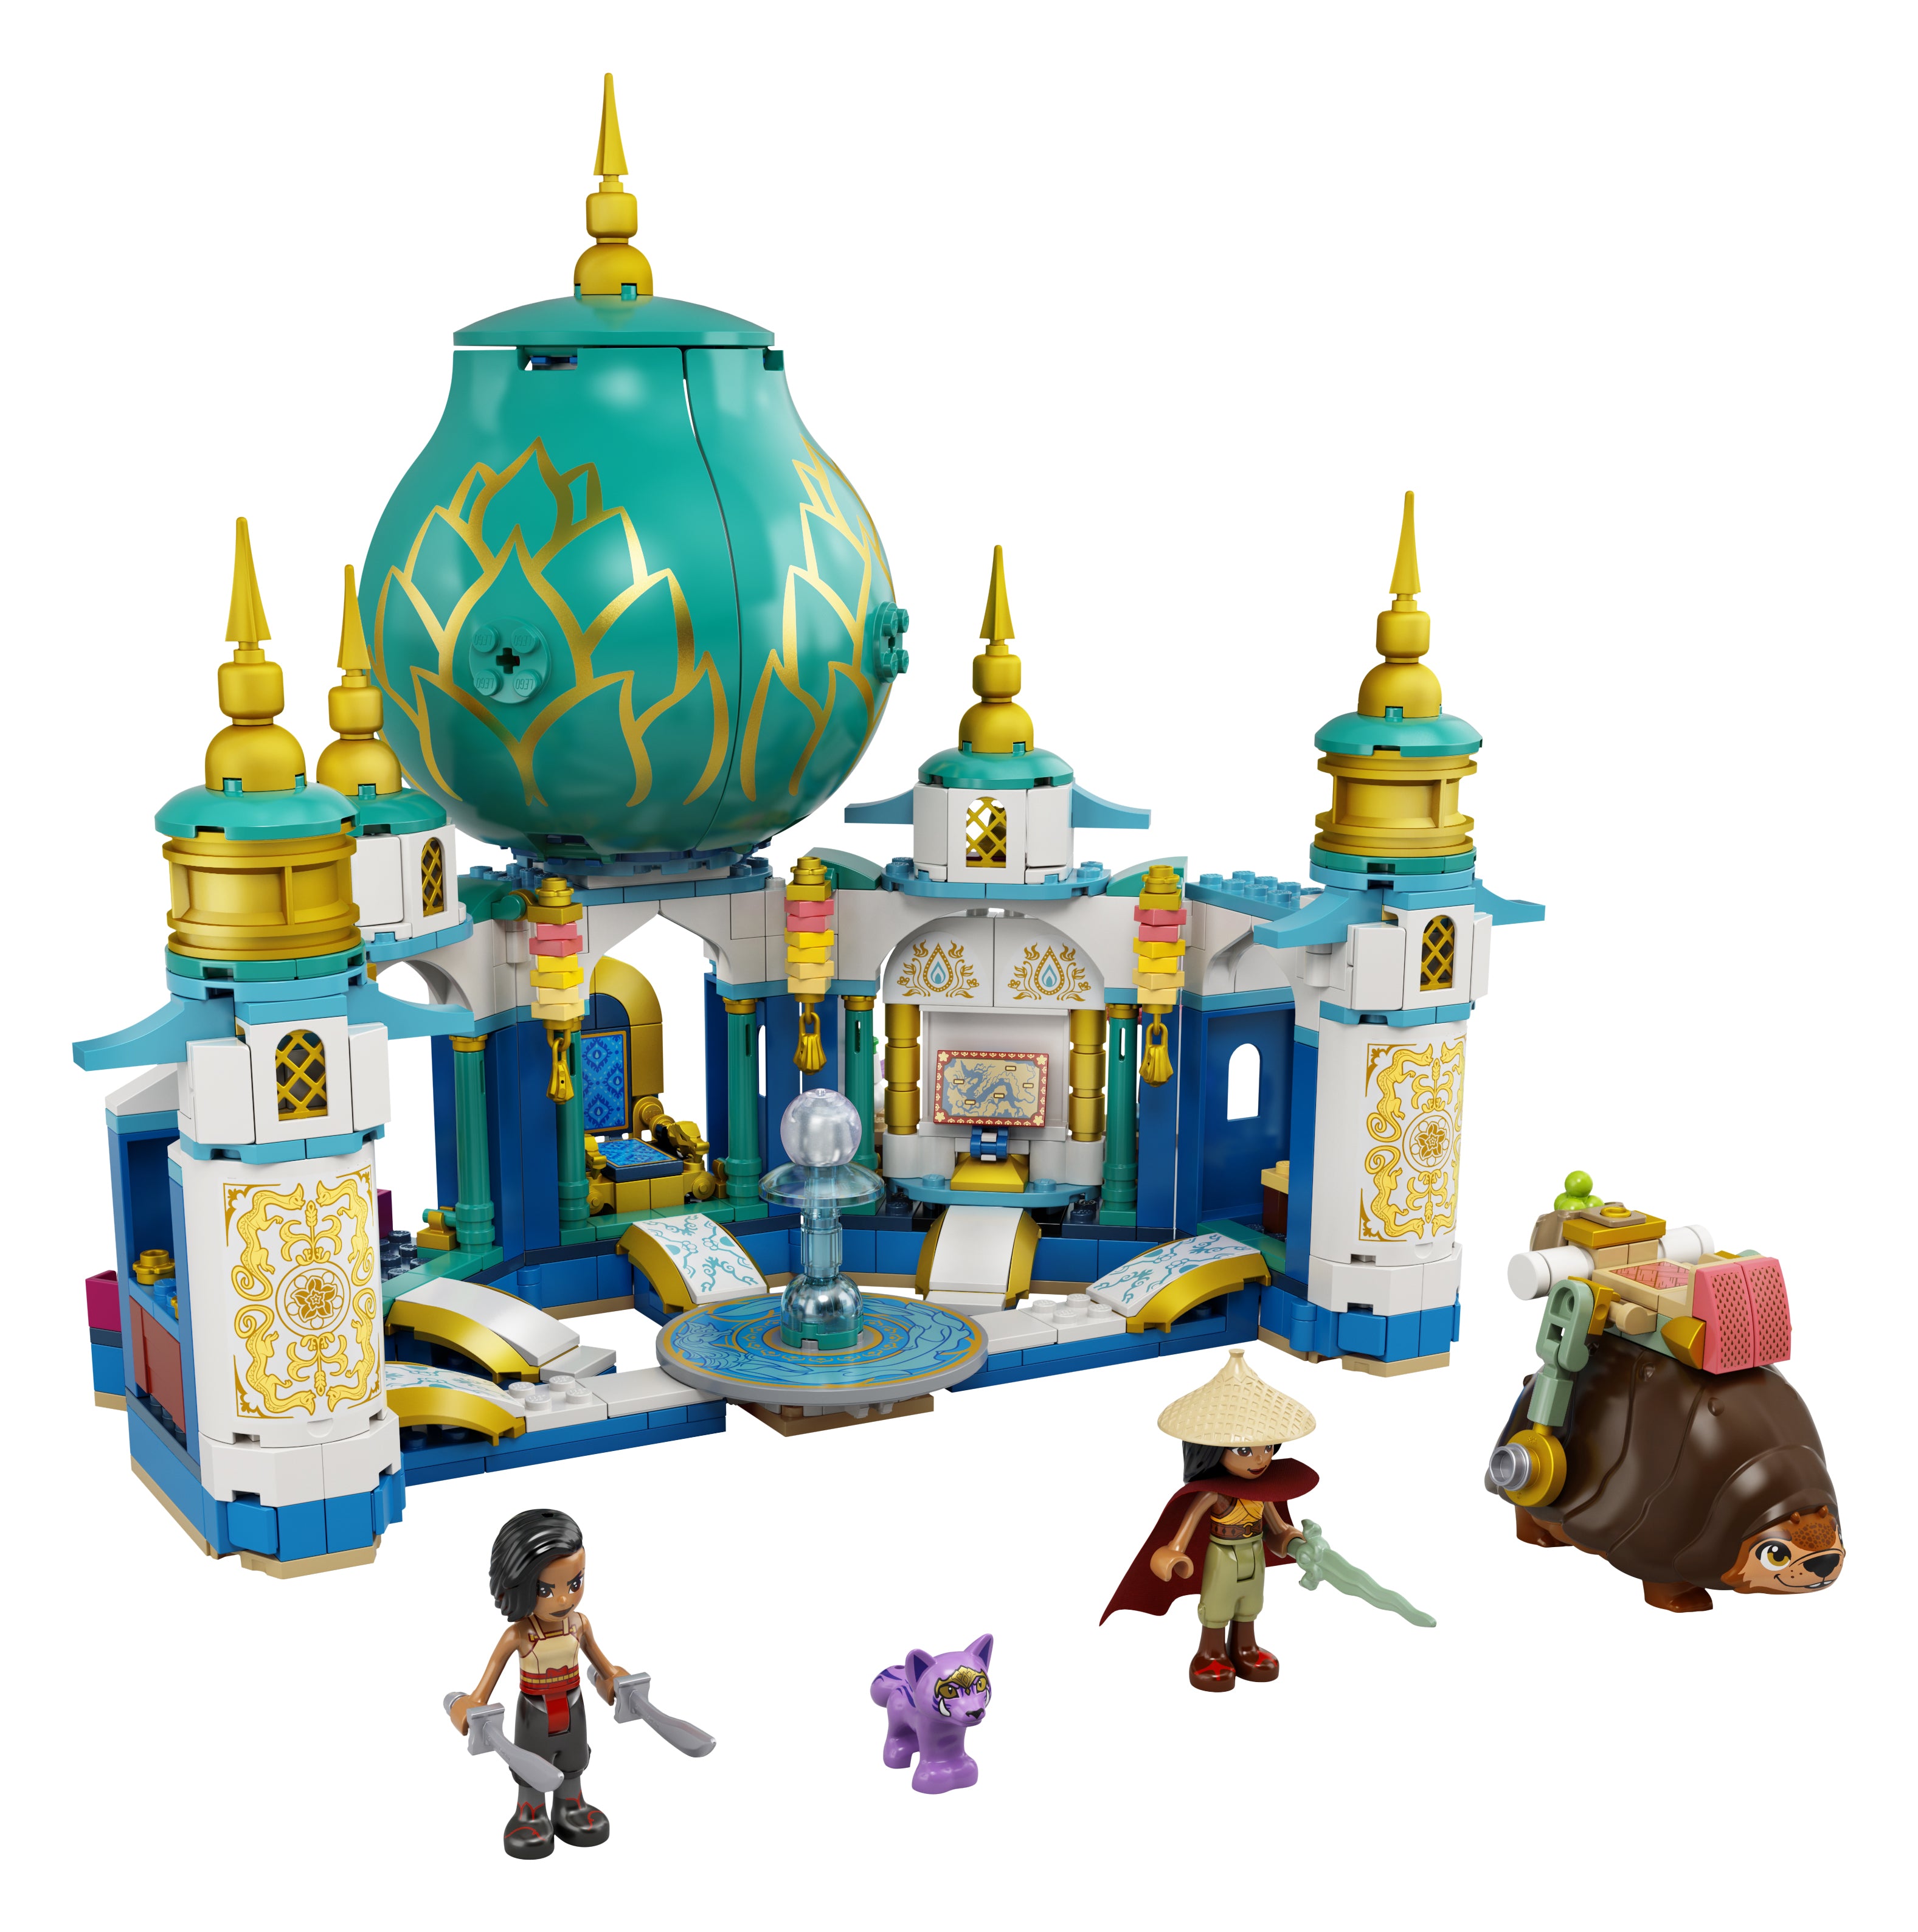 LEGO® Disney Raya and the Heart Palace Playset 43181 Default Title